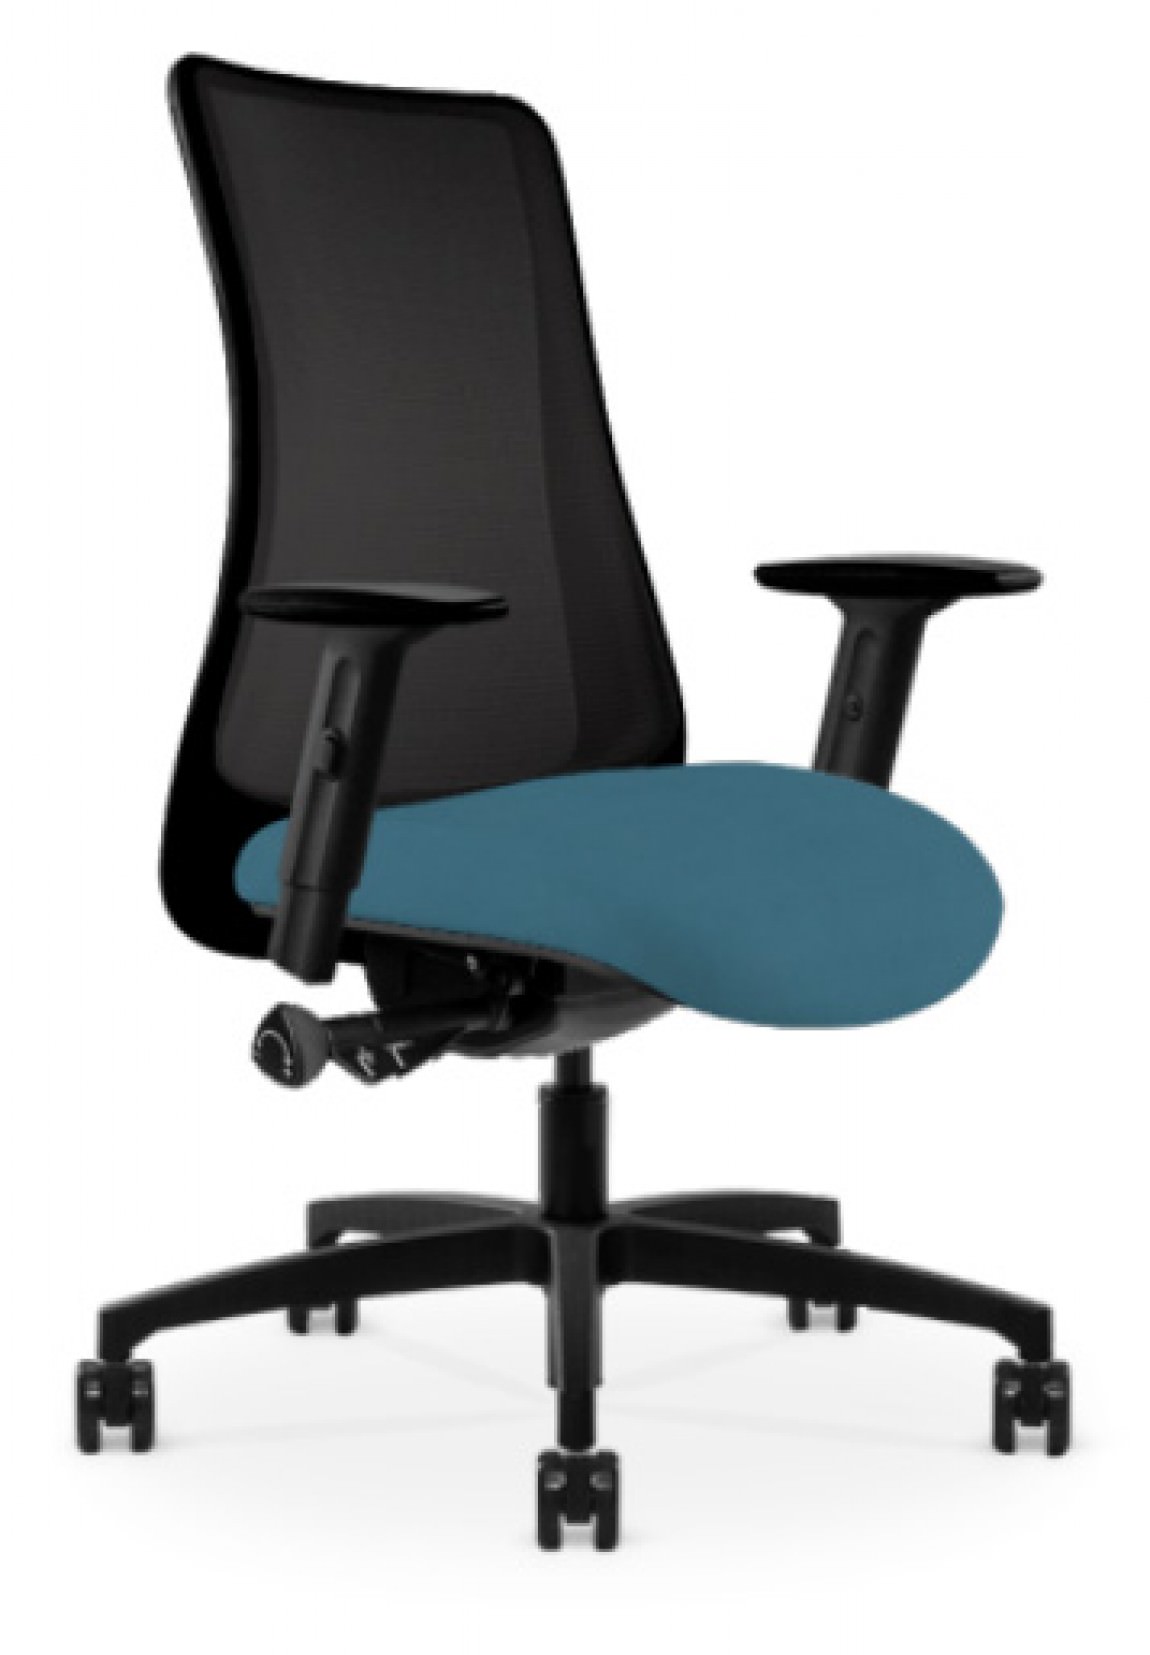 Black Copper Mesh Antimicrobial Office Chair w/ Turquoise Seat